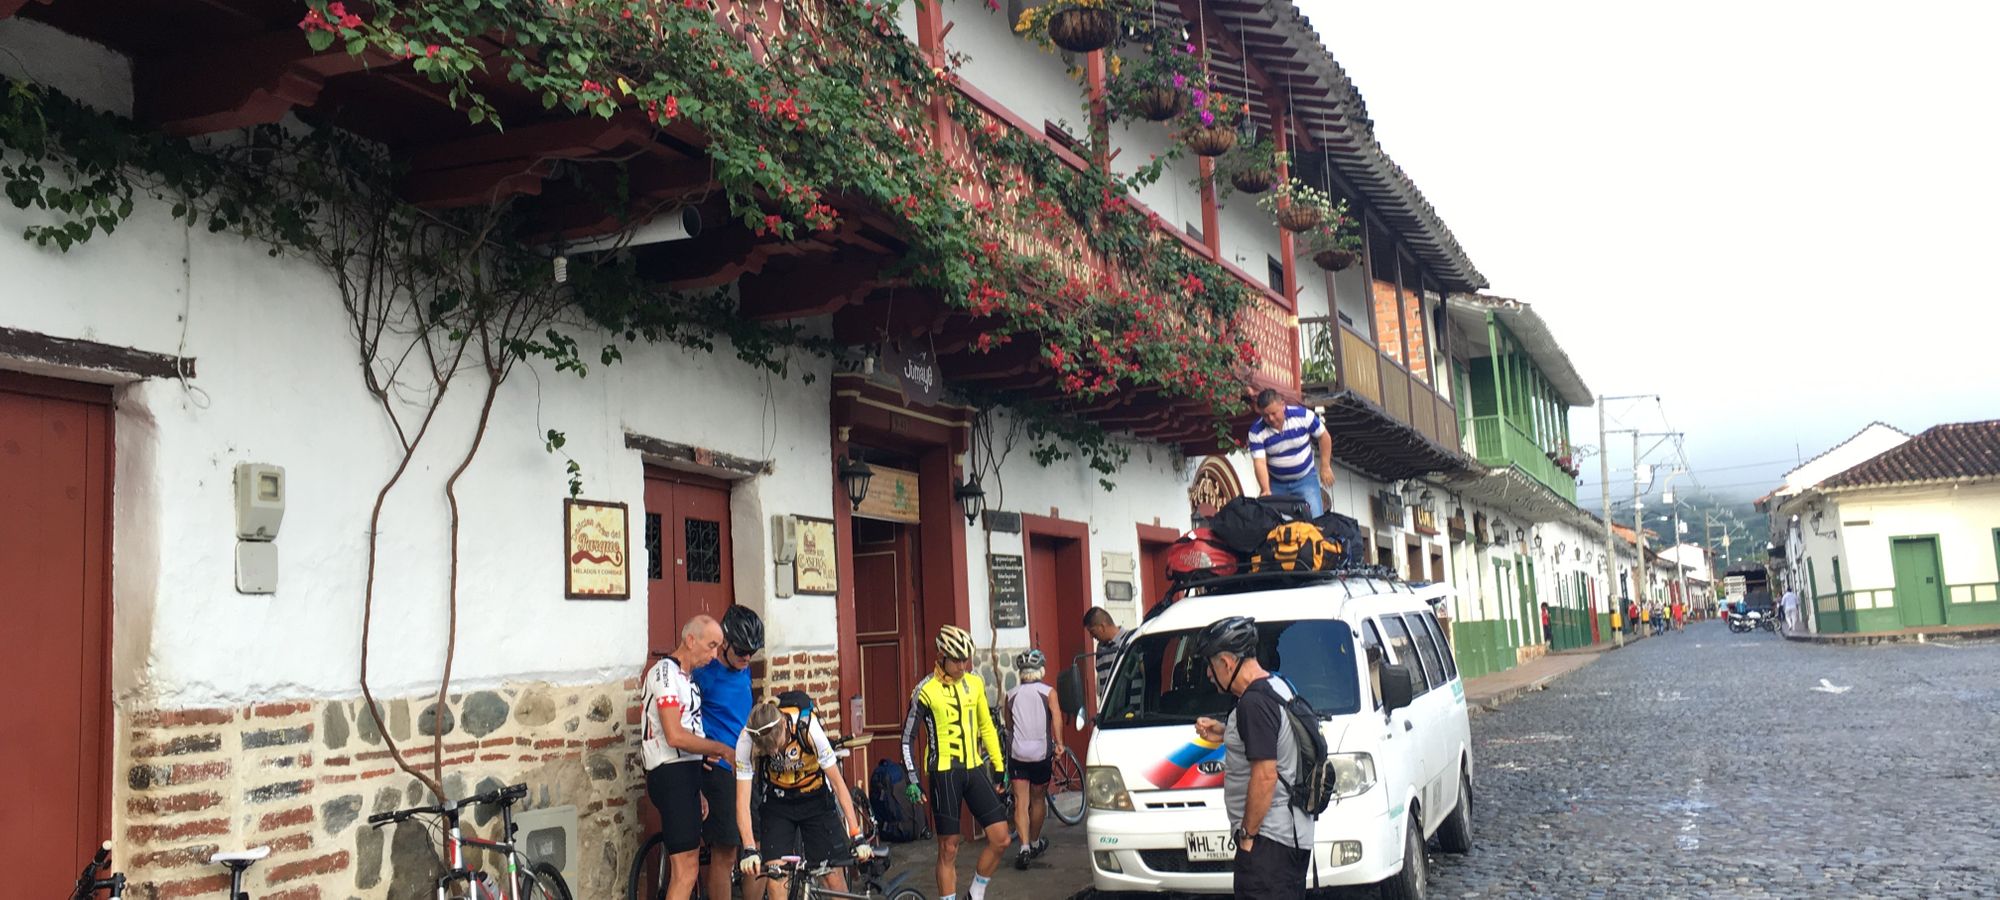 cycling holidays Colombia